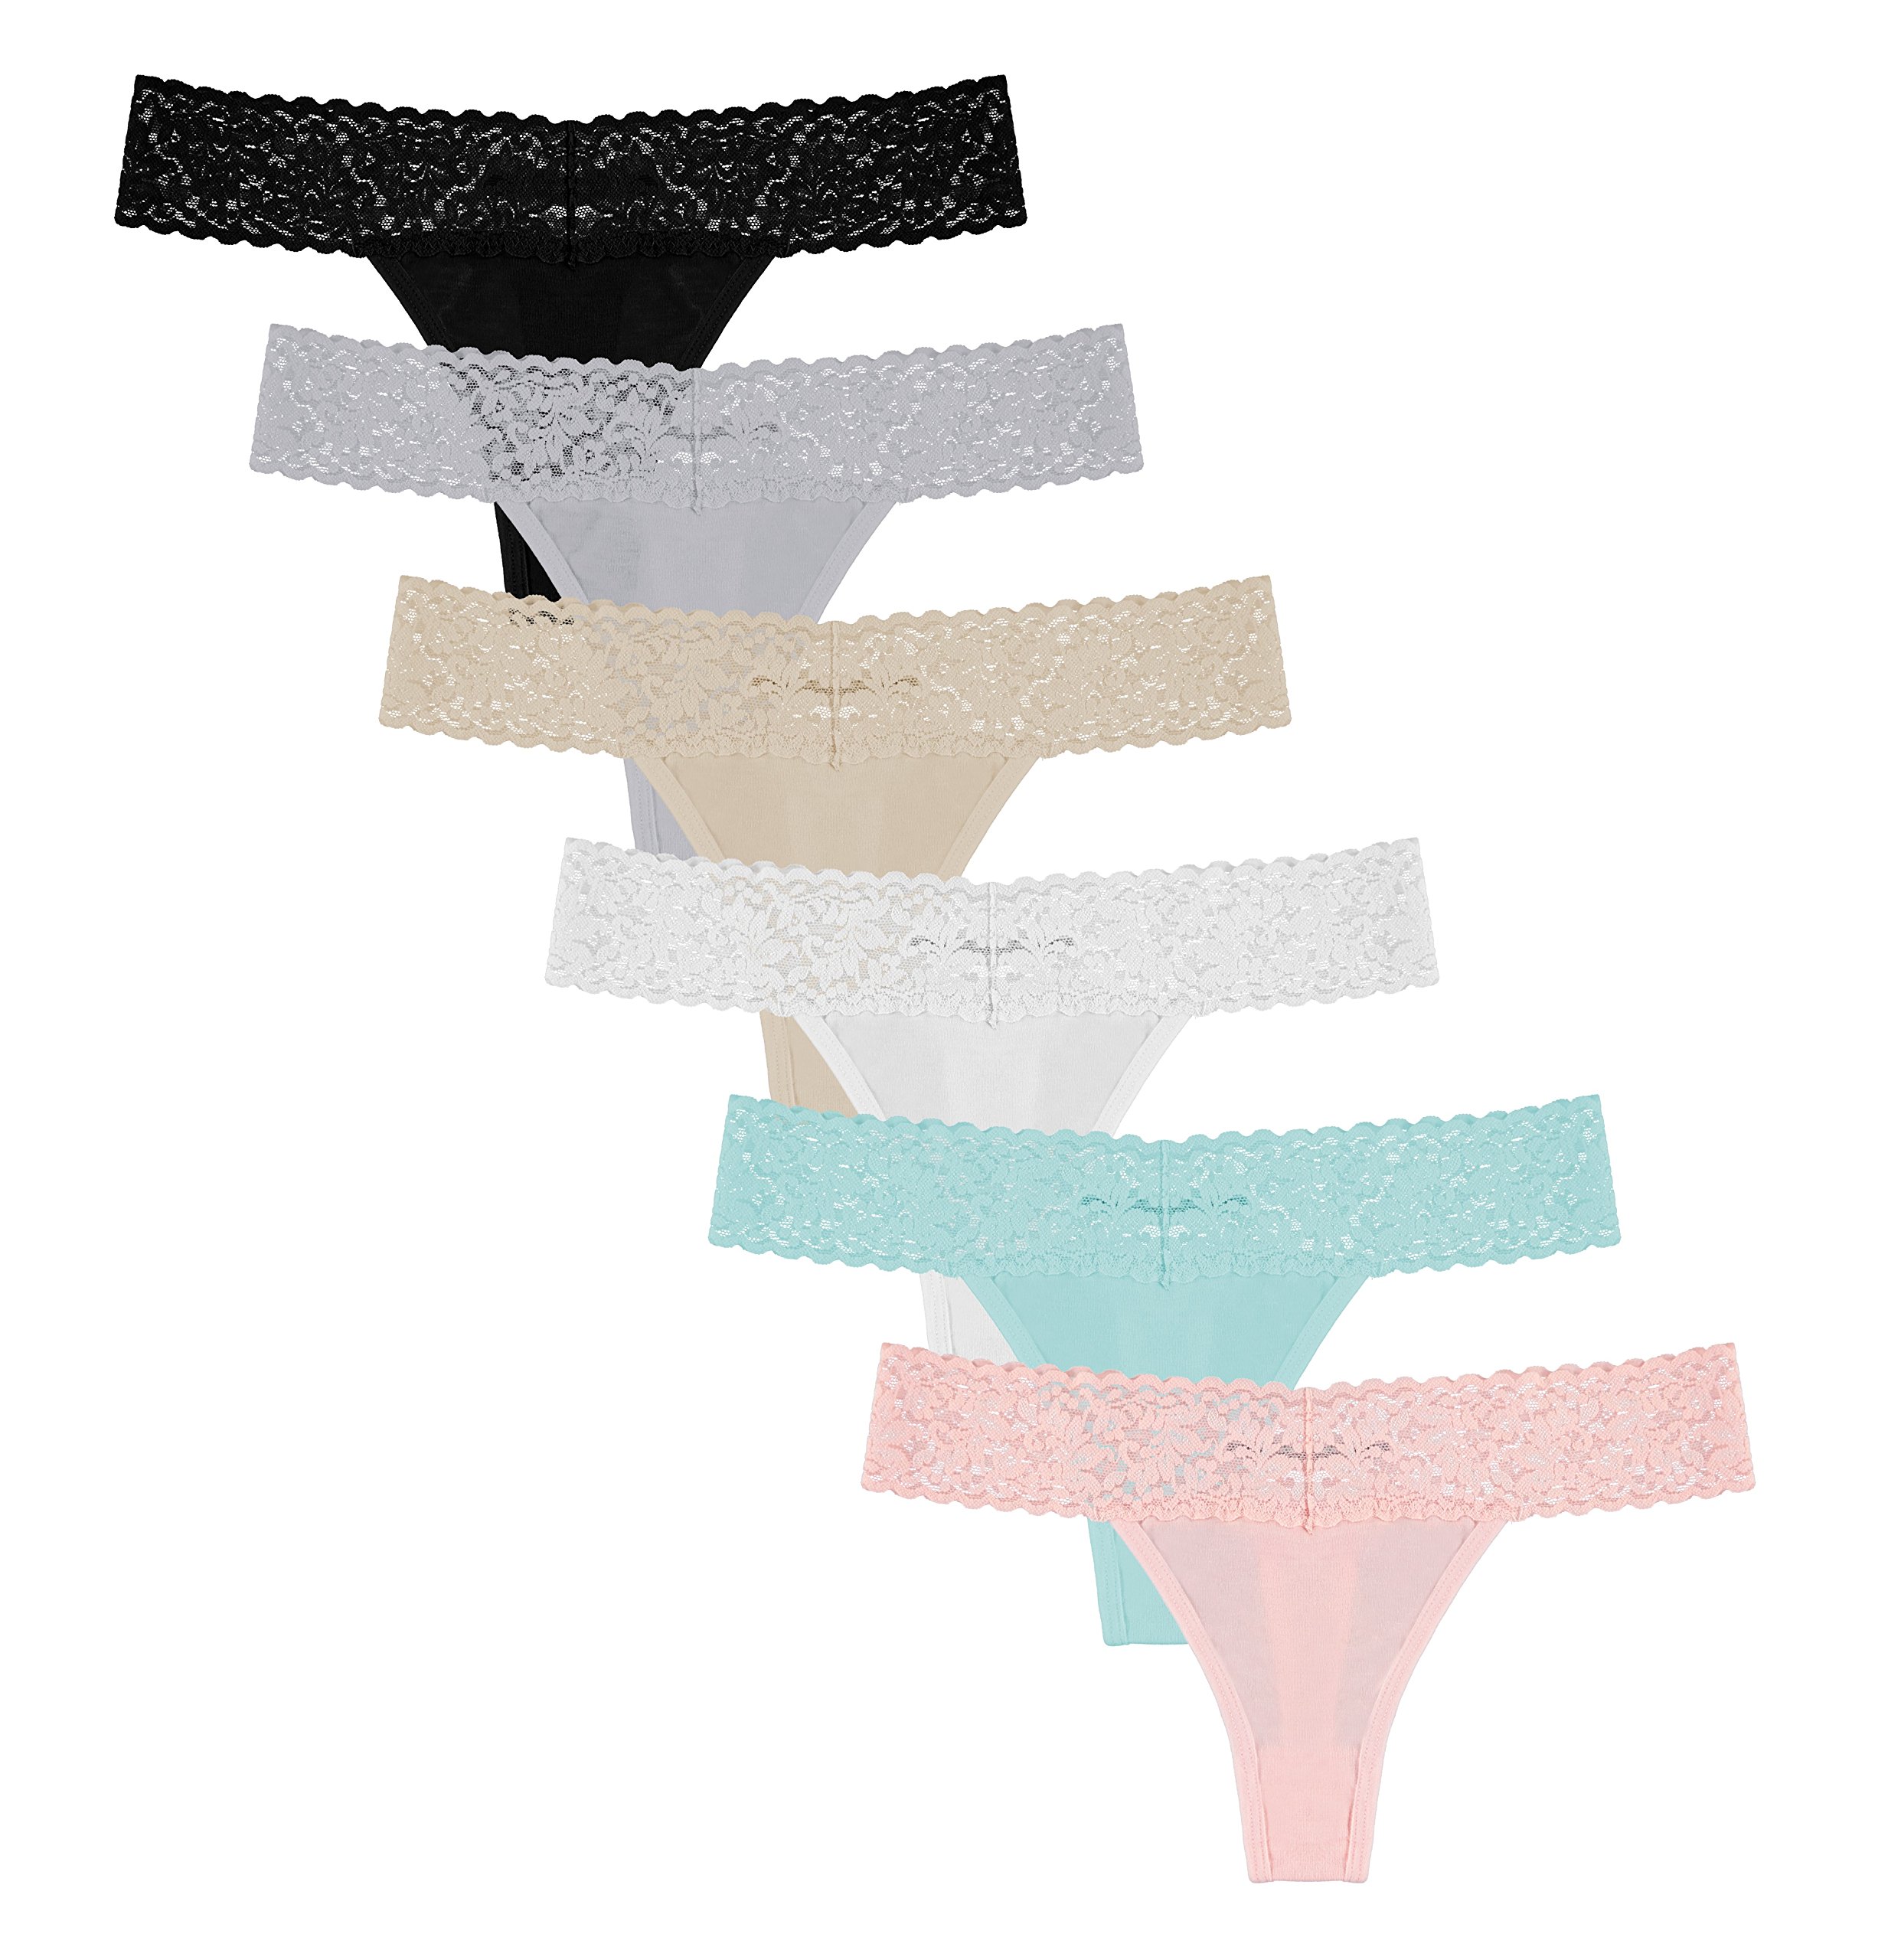 Free to Live 6 Pack Women's Thongs - Lace Band Cotton Underwear